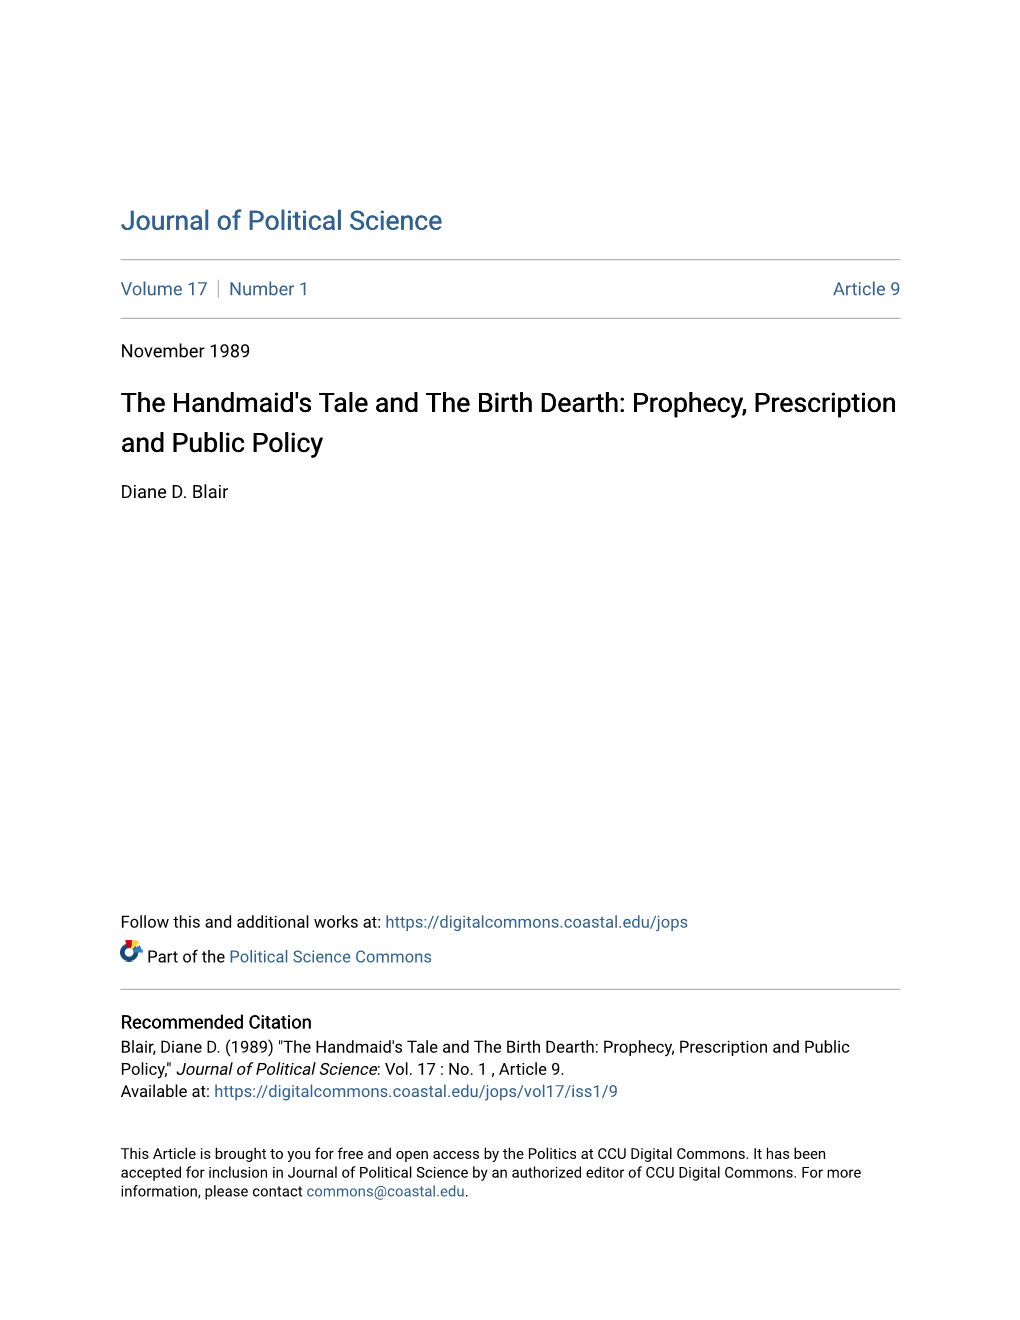 The Handmaid's Tale and the Birth Dearth: Prophecy, Prescription and Public Policy